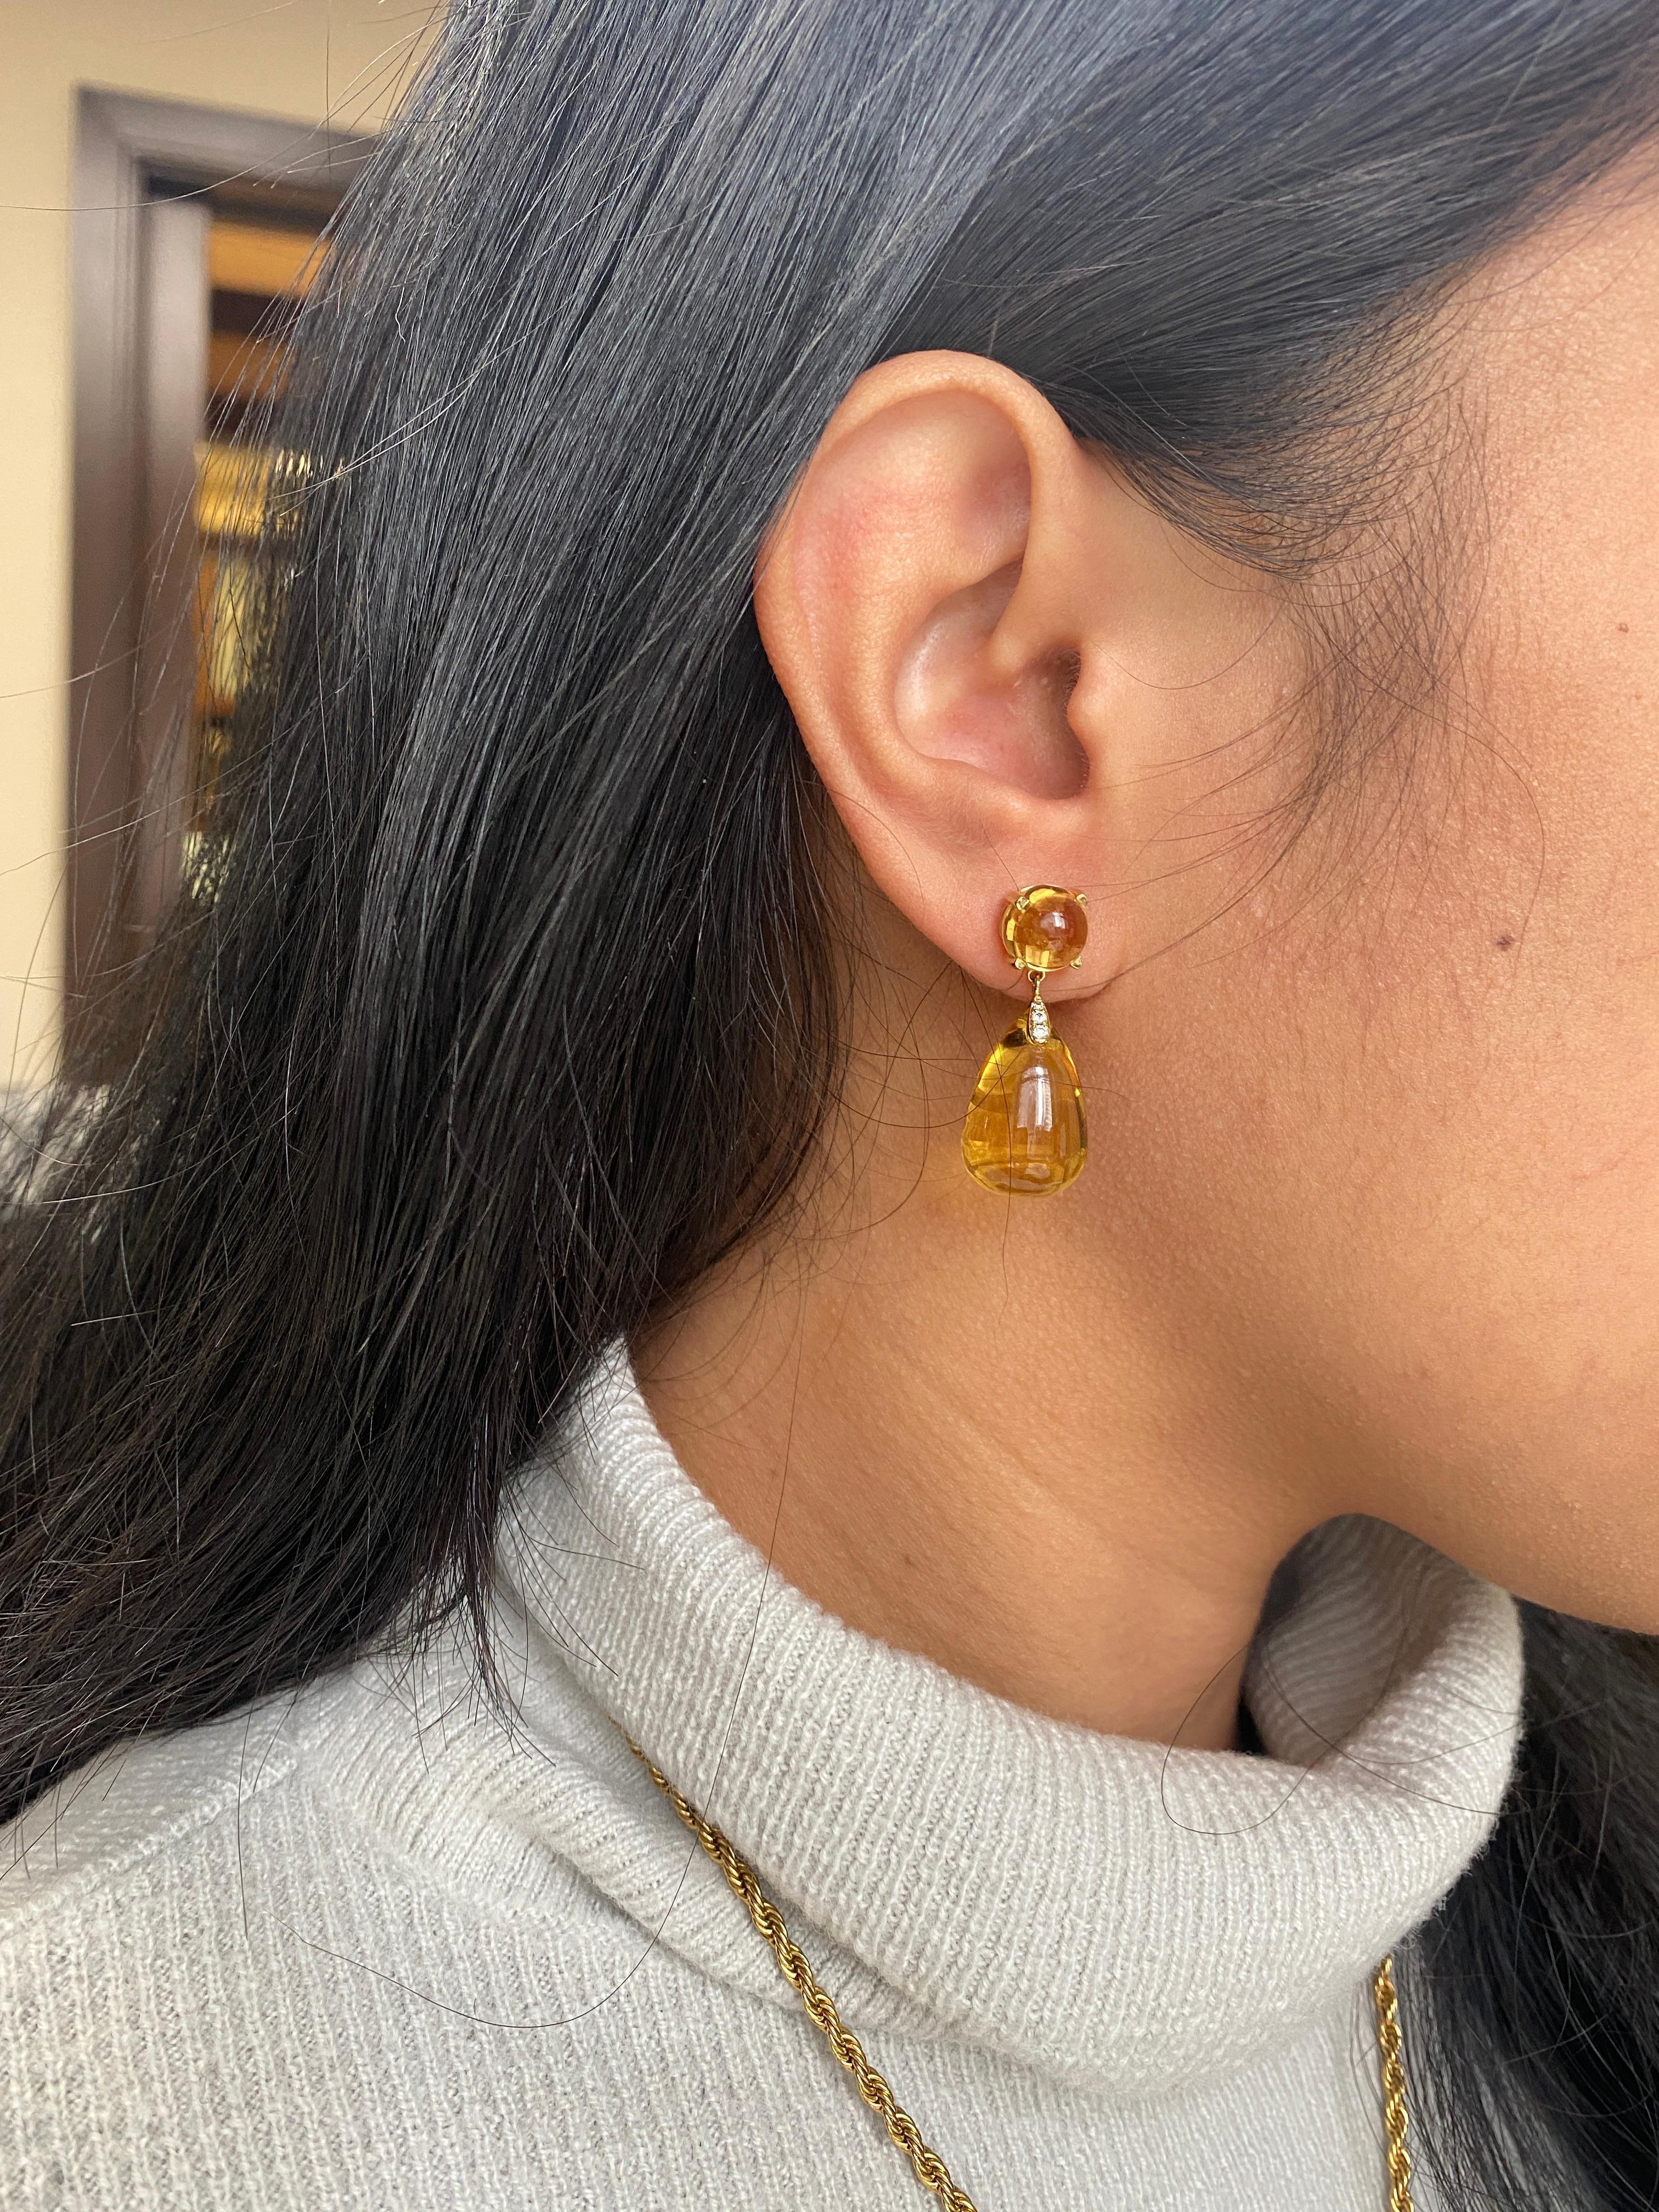 Beautiful Drop Cabochon Citrine Earrings with Diamonds in 18K Yellow Gold, from ‘Naughty' Collection. This collection has dangerous curves tied with exotic colors. When unveiled, these pieces will bring a smile to the conservative aficionado.

*